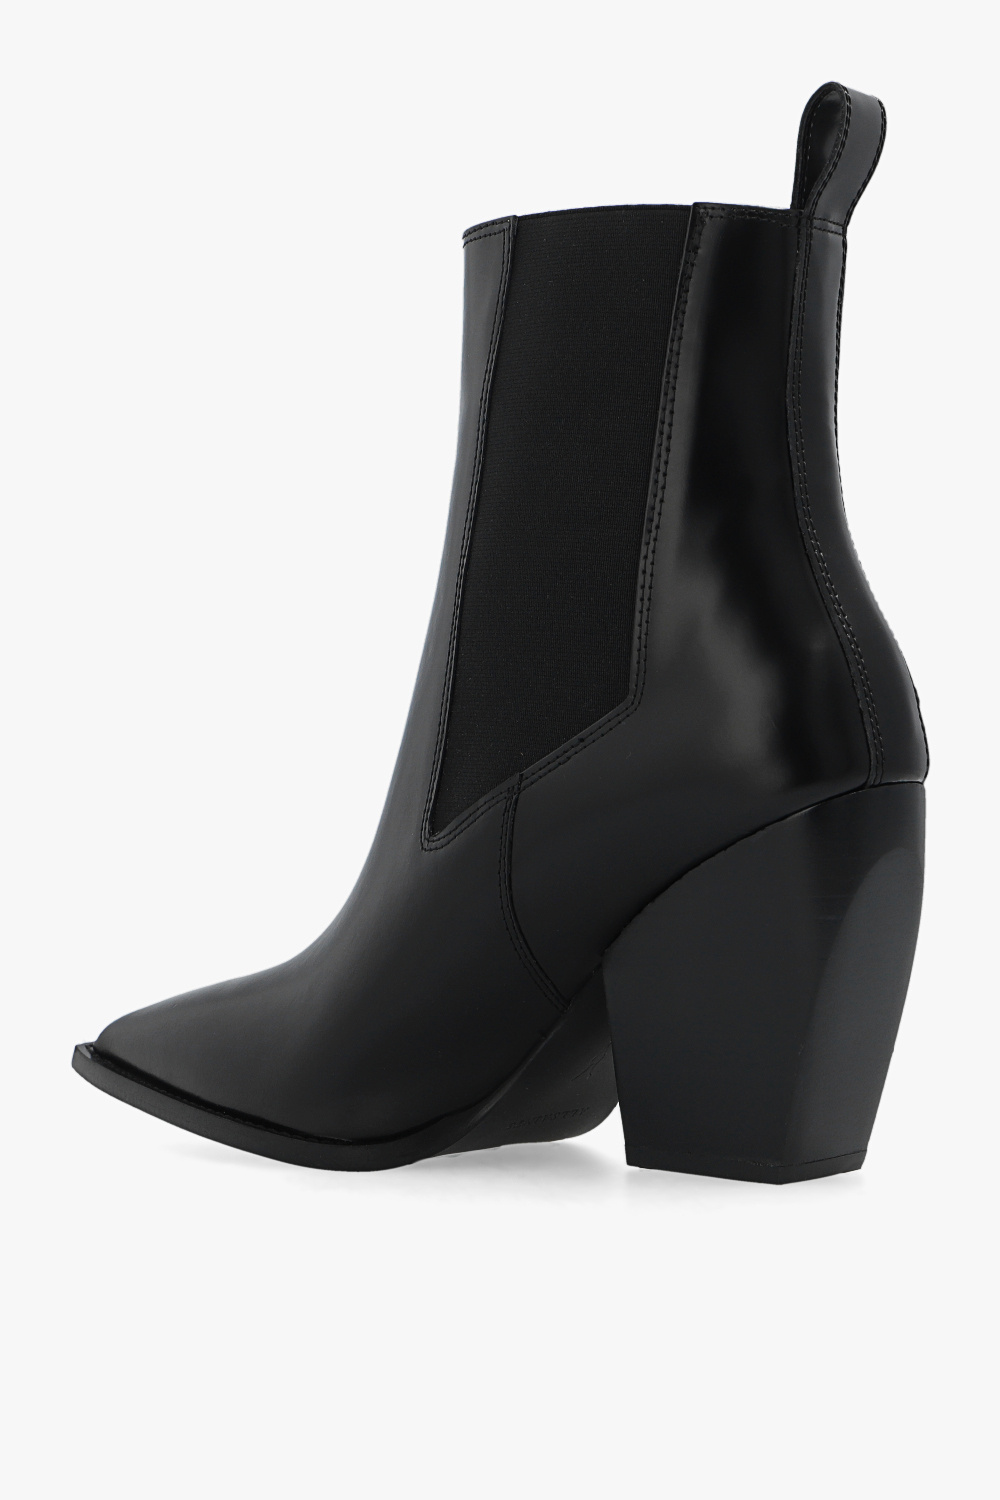 AllSaints ‘Ria’ heeled ankle boots